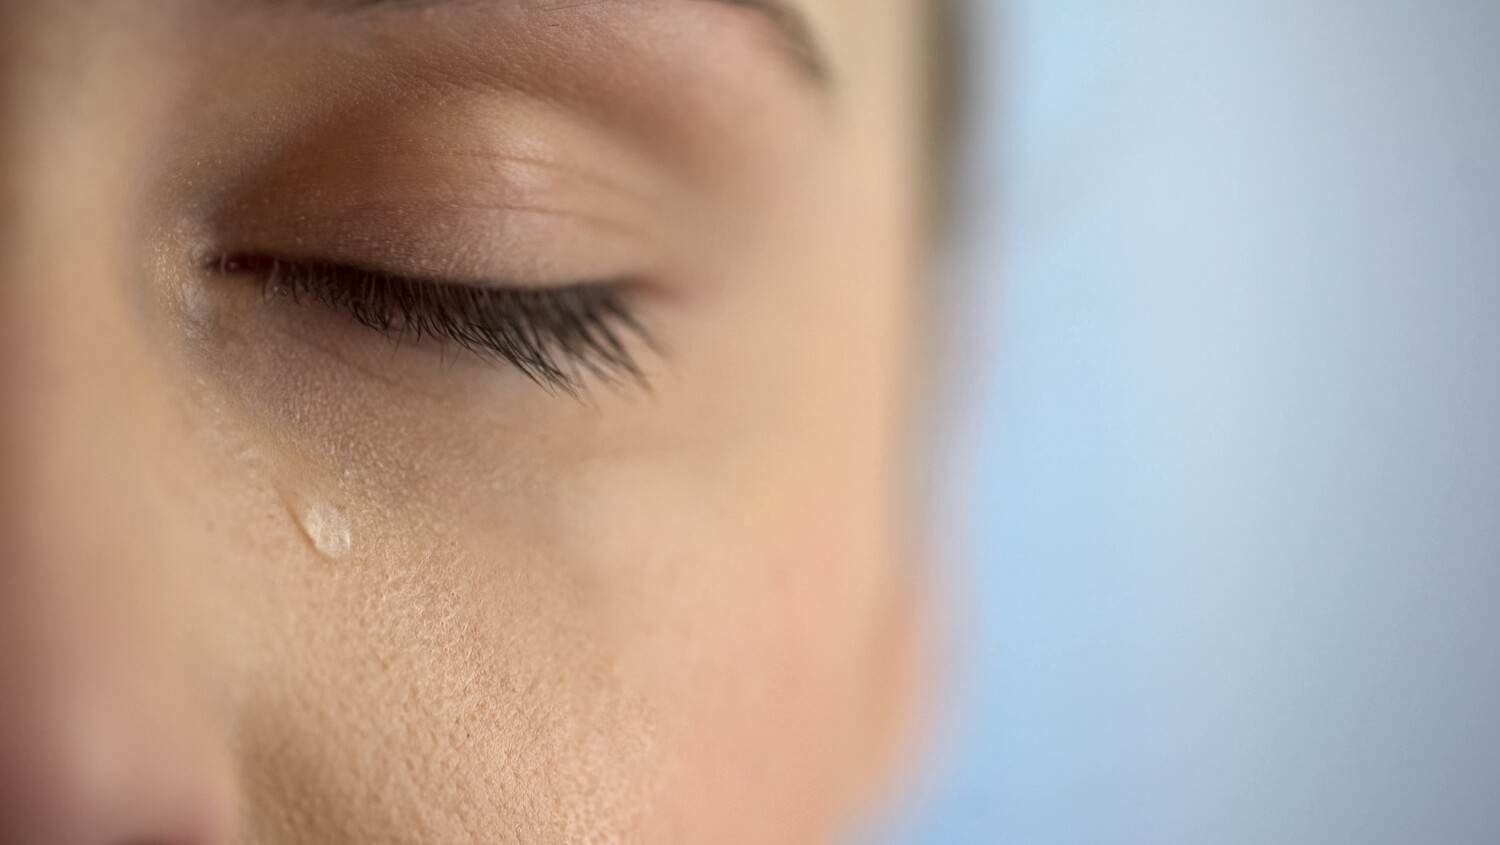 close-up photo of a tear and a person's eye